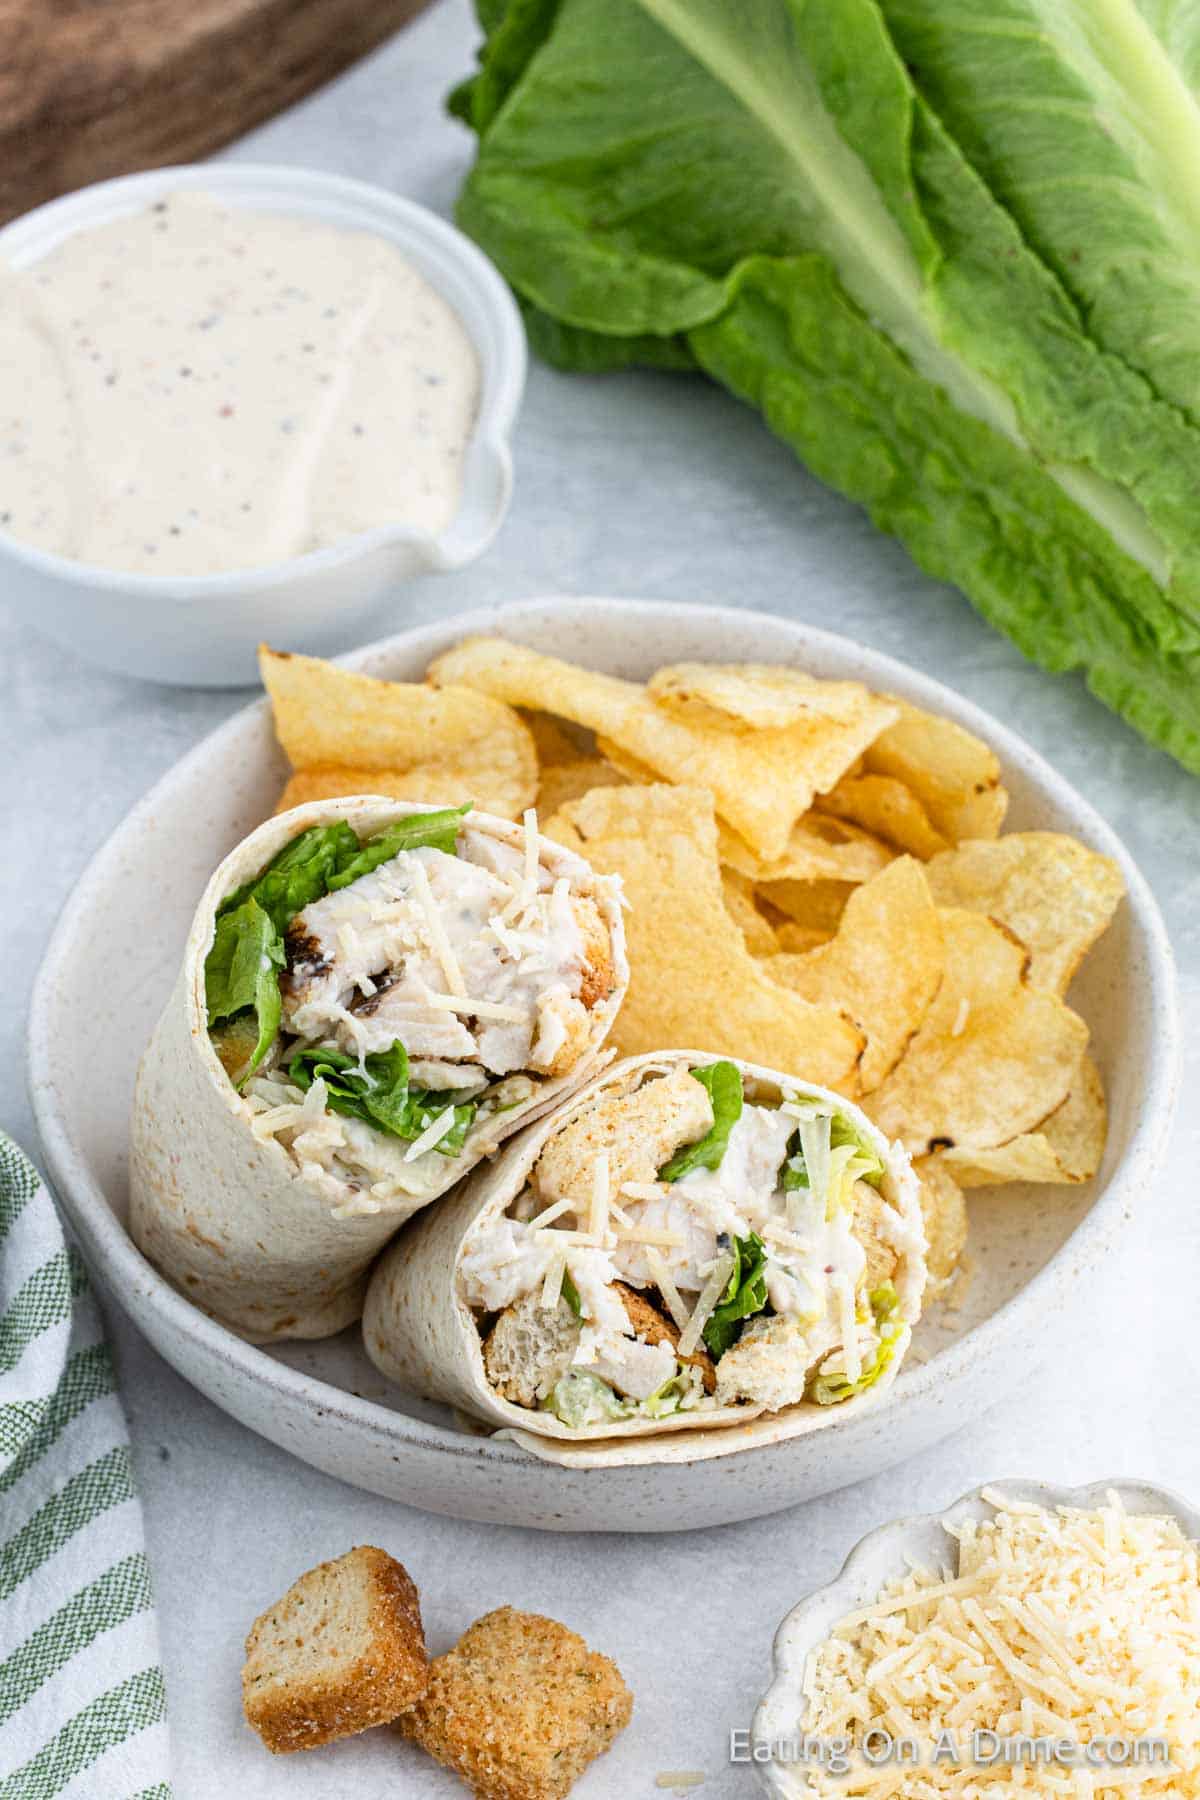 Chicken caesar wrap cut in half on a plate with chips